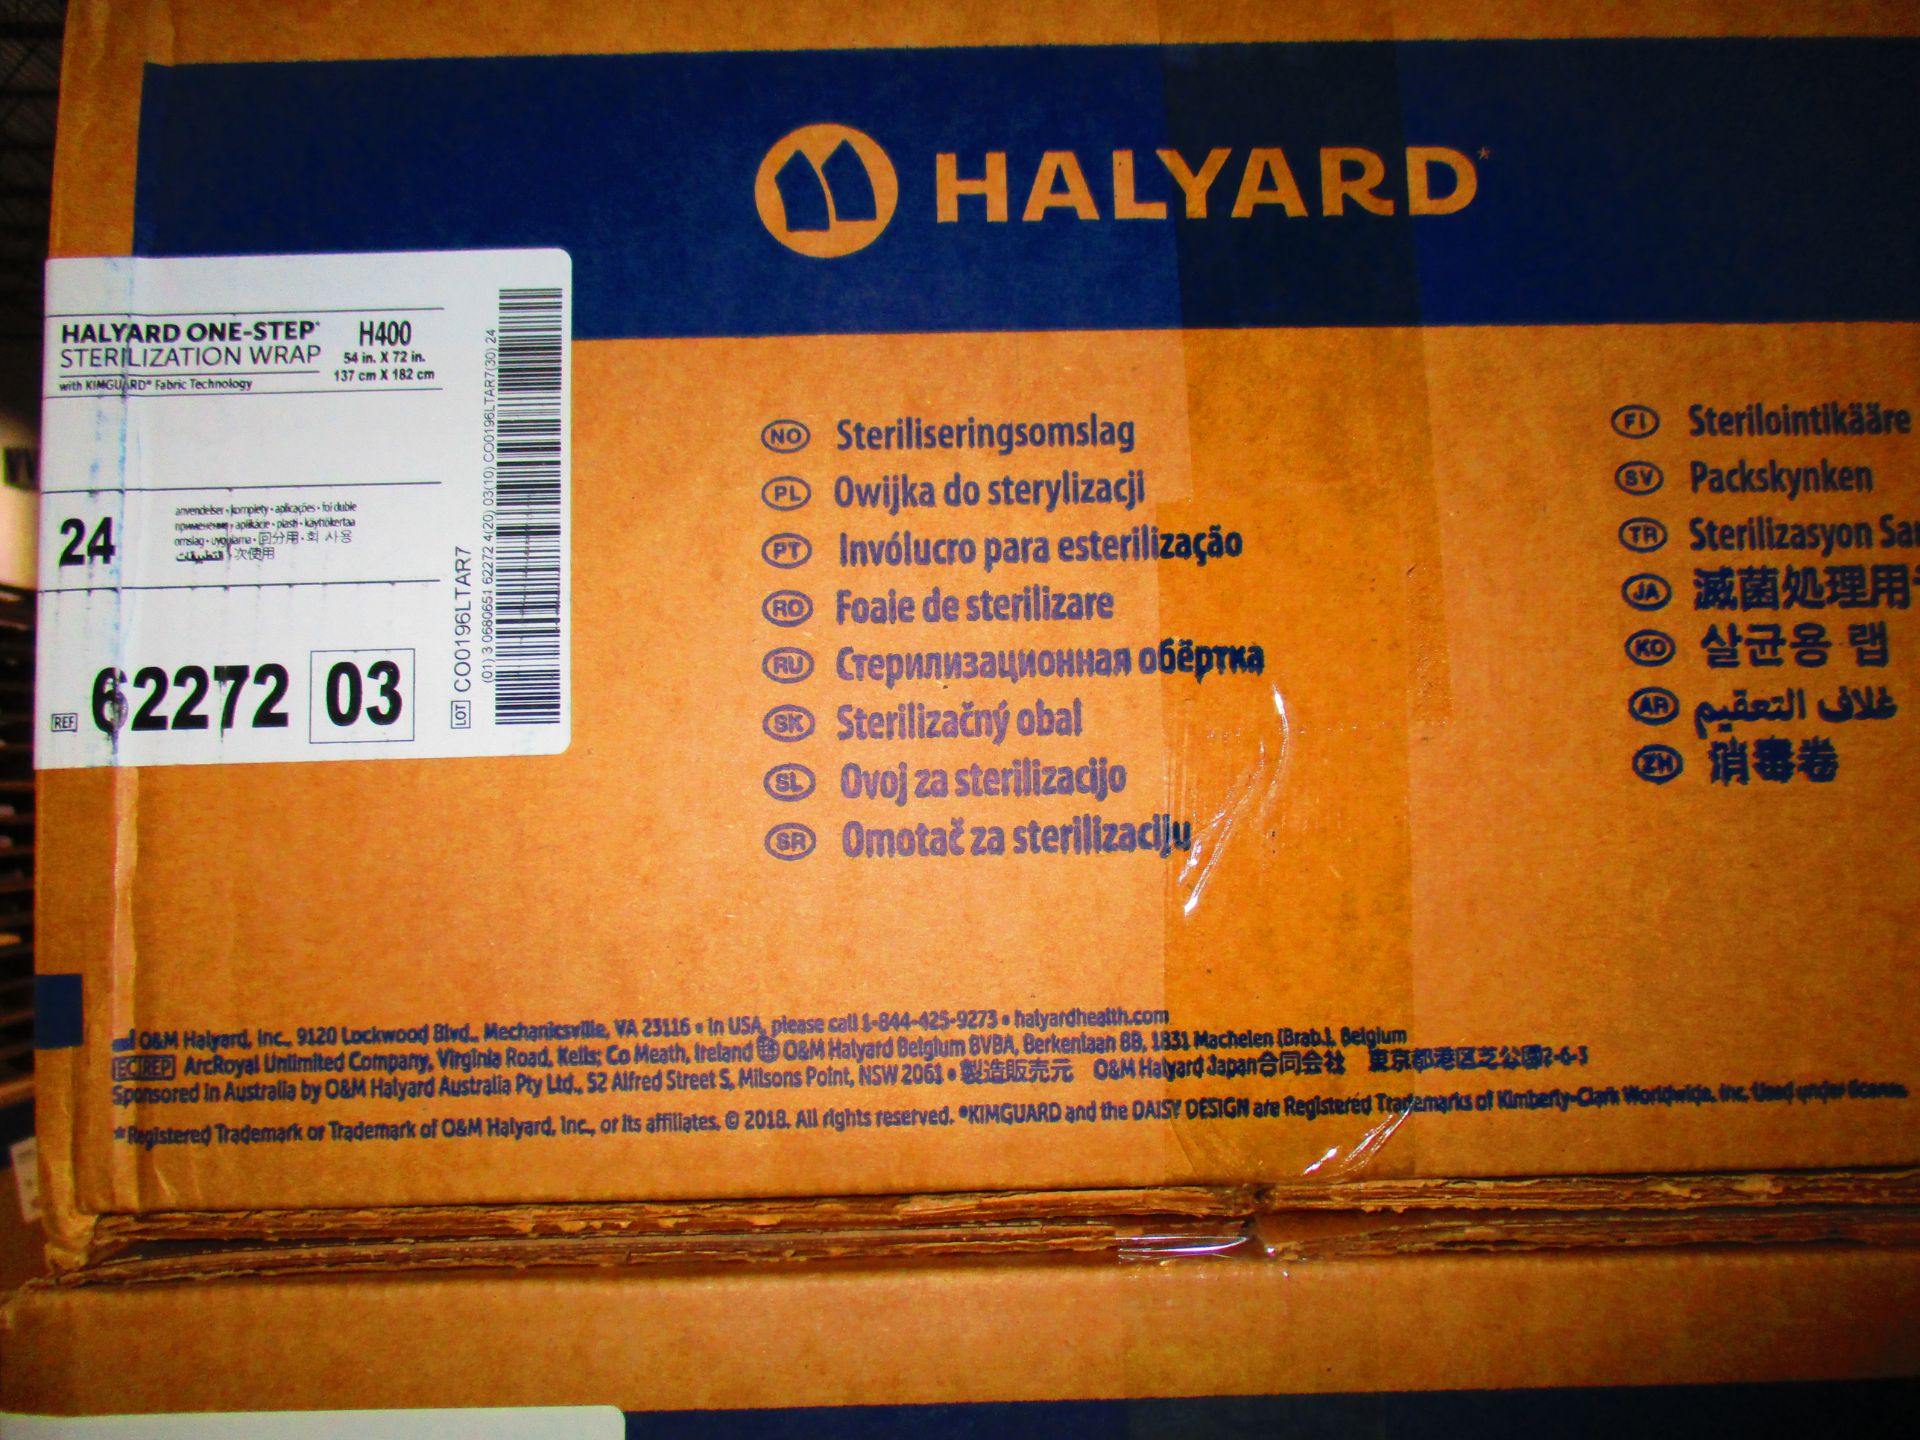 HALYARD One-Step Sterilization Wrap, 54 X 72, Ref# 6227203, 305 CASES ON 5 PALLETS, 24 EA/CS - Image 2 of 3